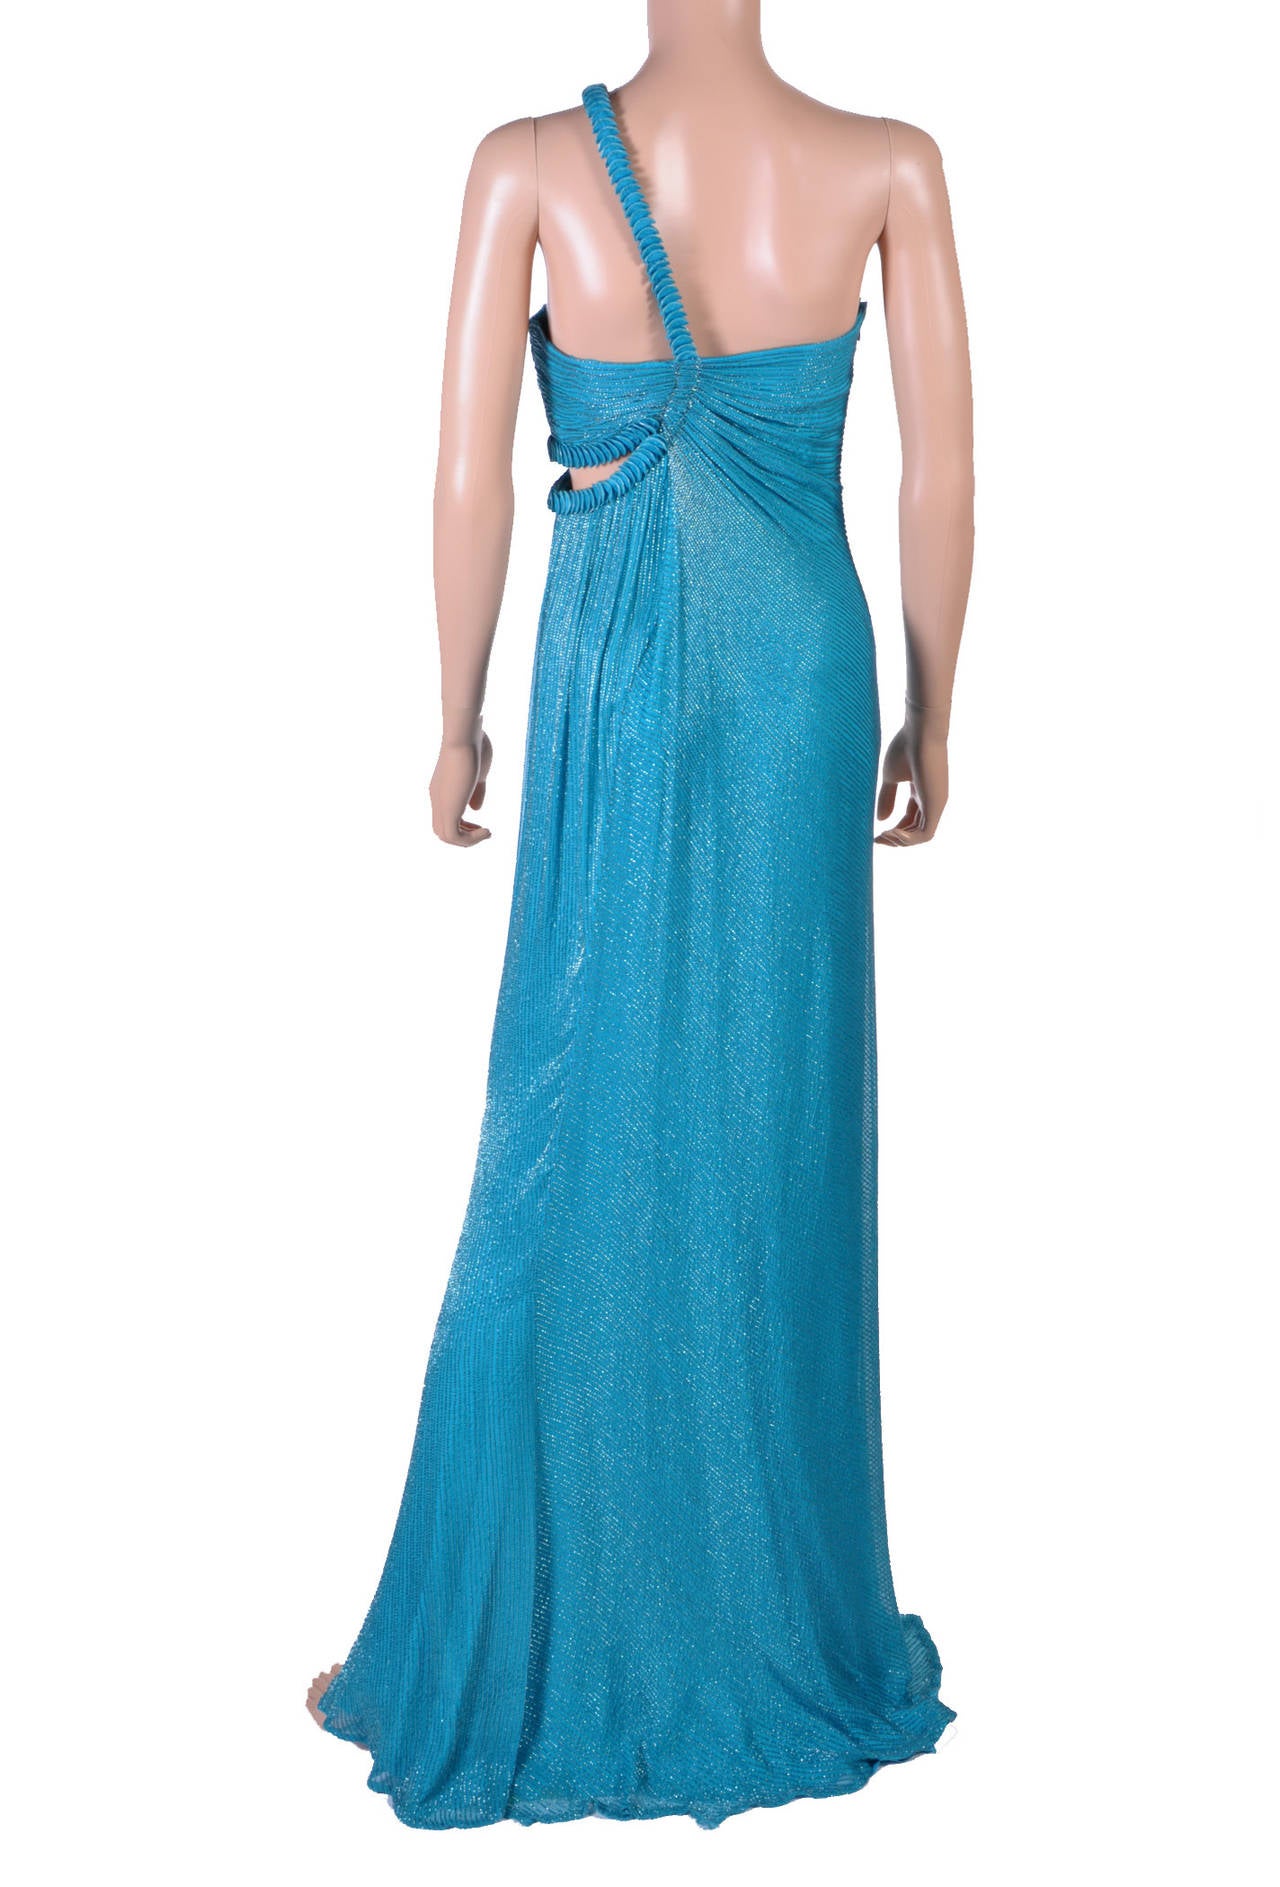 New VERSACE FULLY EMBROIDERED LONG DRESS 1